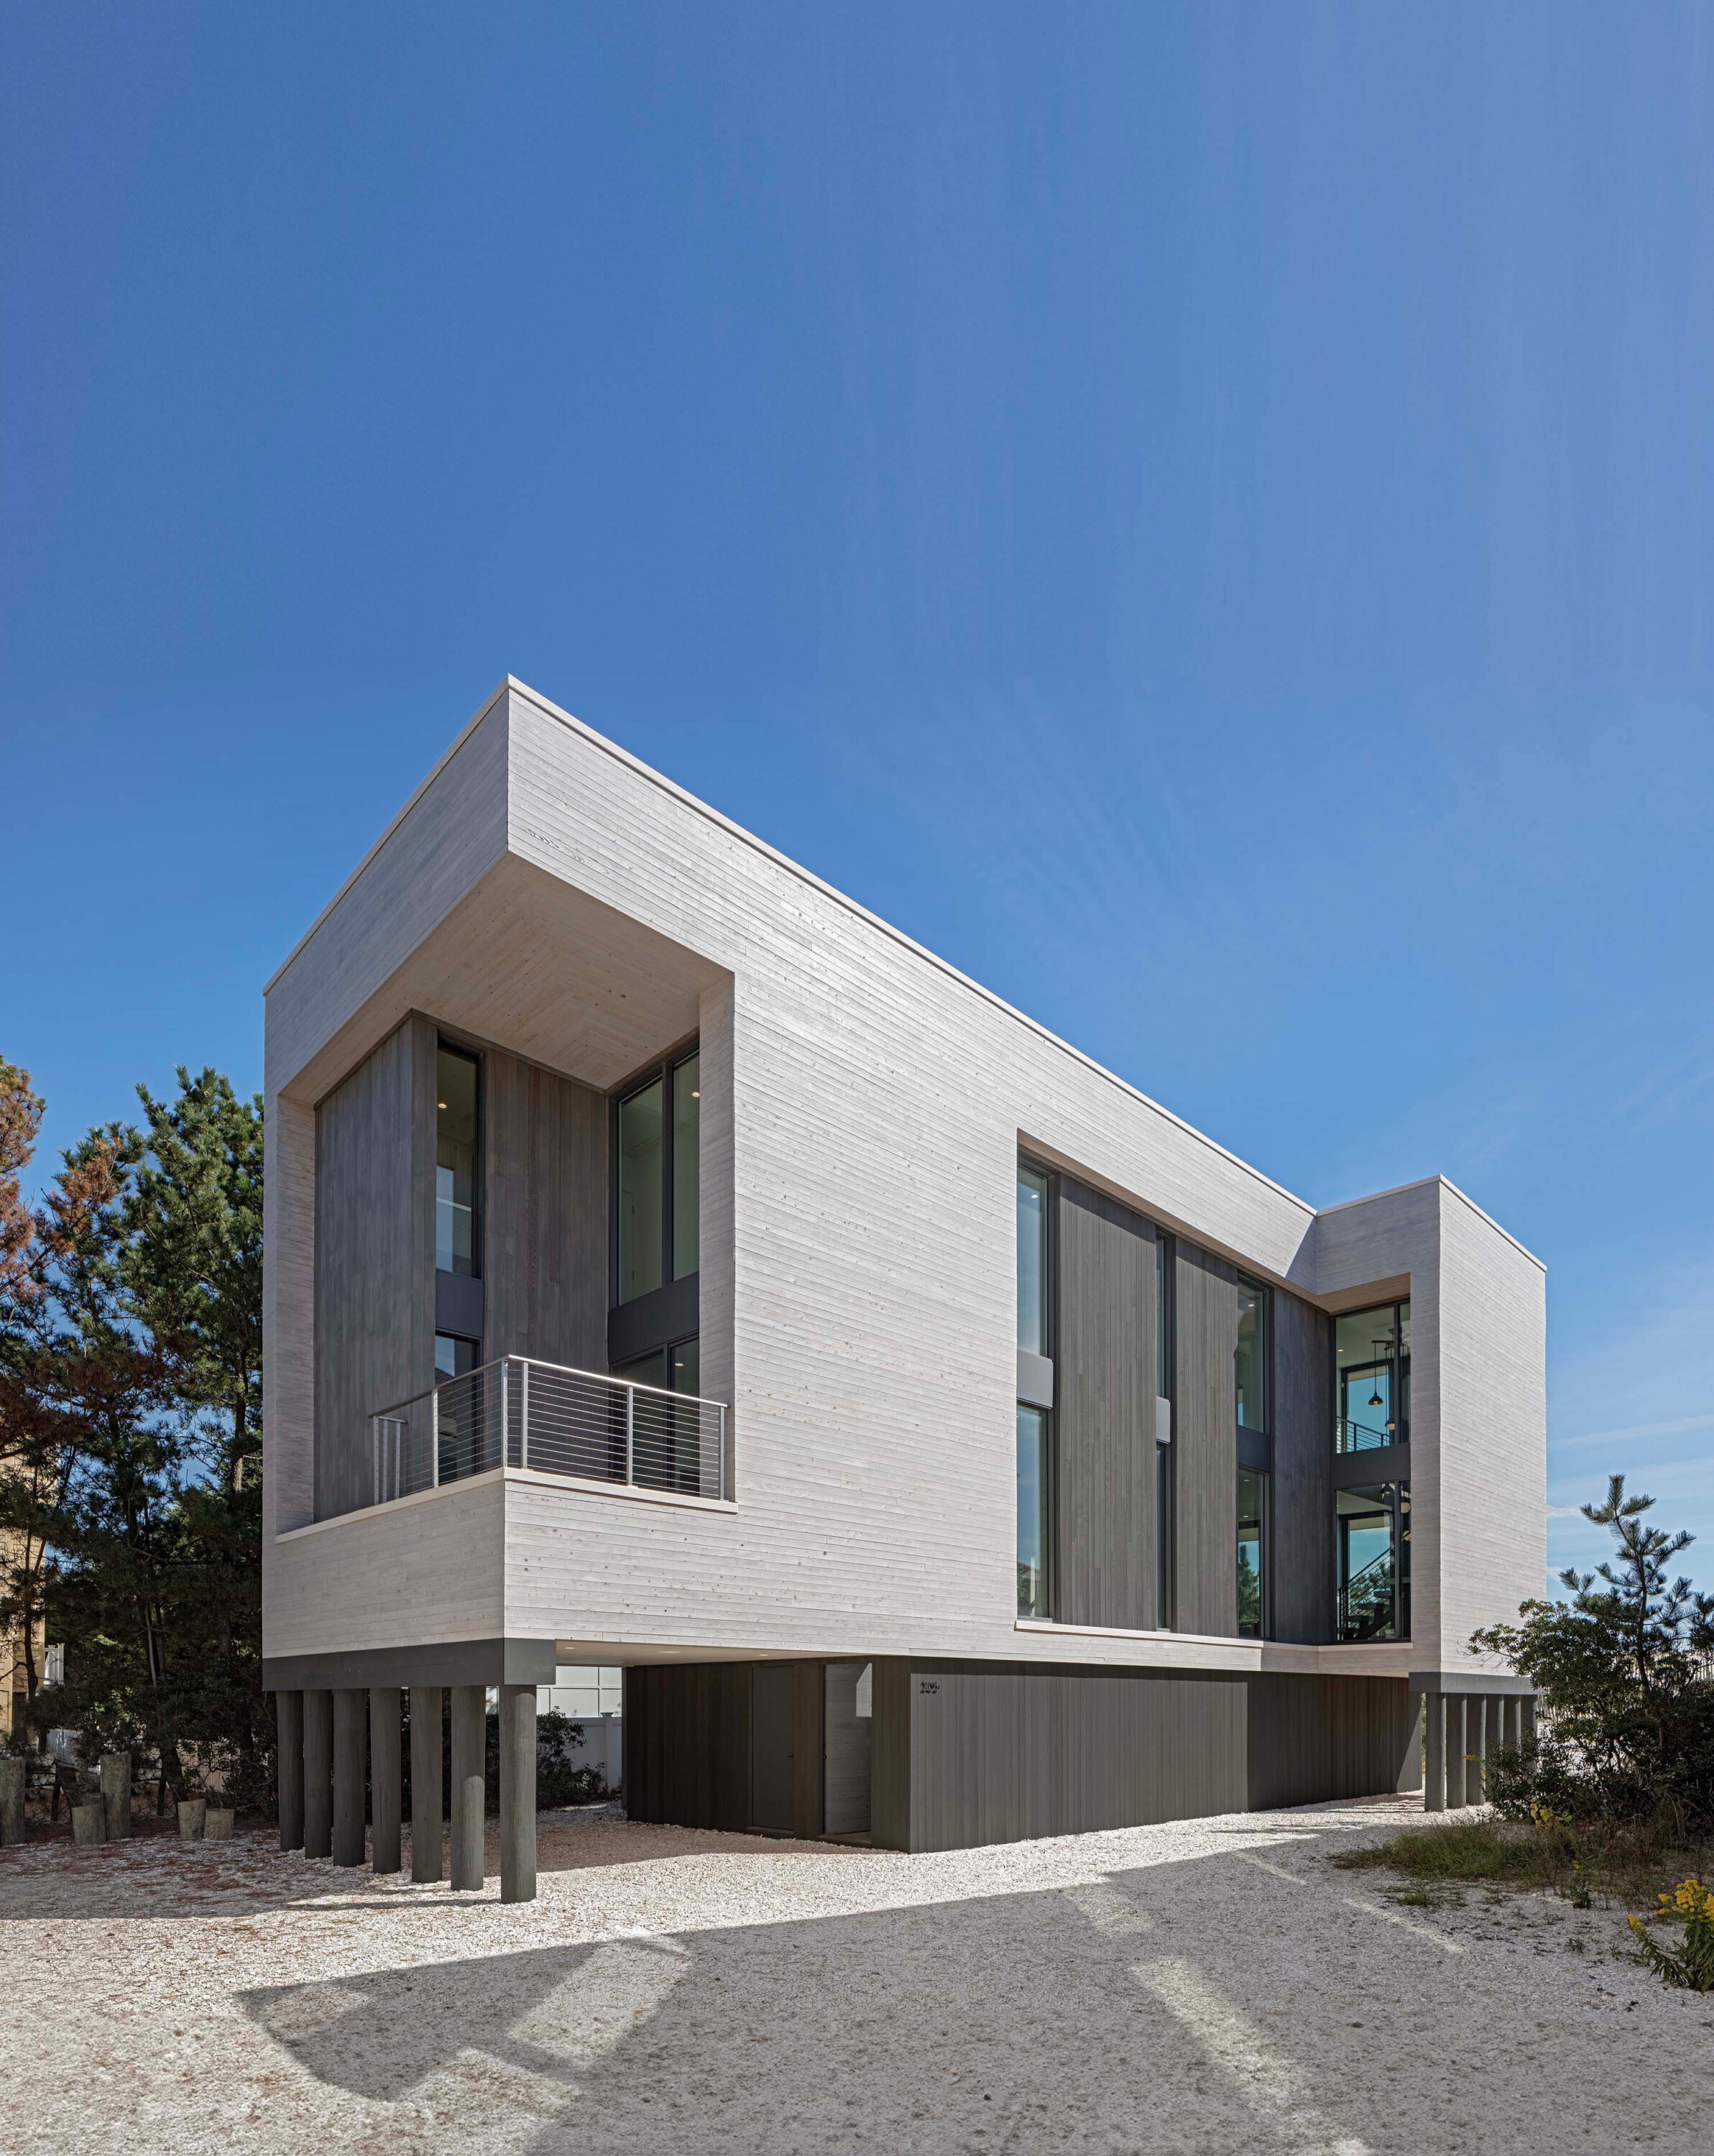 Exterior photo of Beach Haven Residence by Specht Novak Architects, shot by Taggart Sorensen, showcasing the cedar exterior walls of the sculptural form.